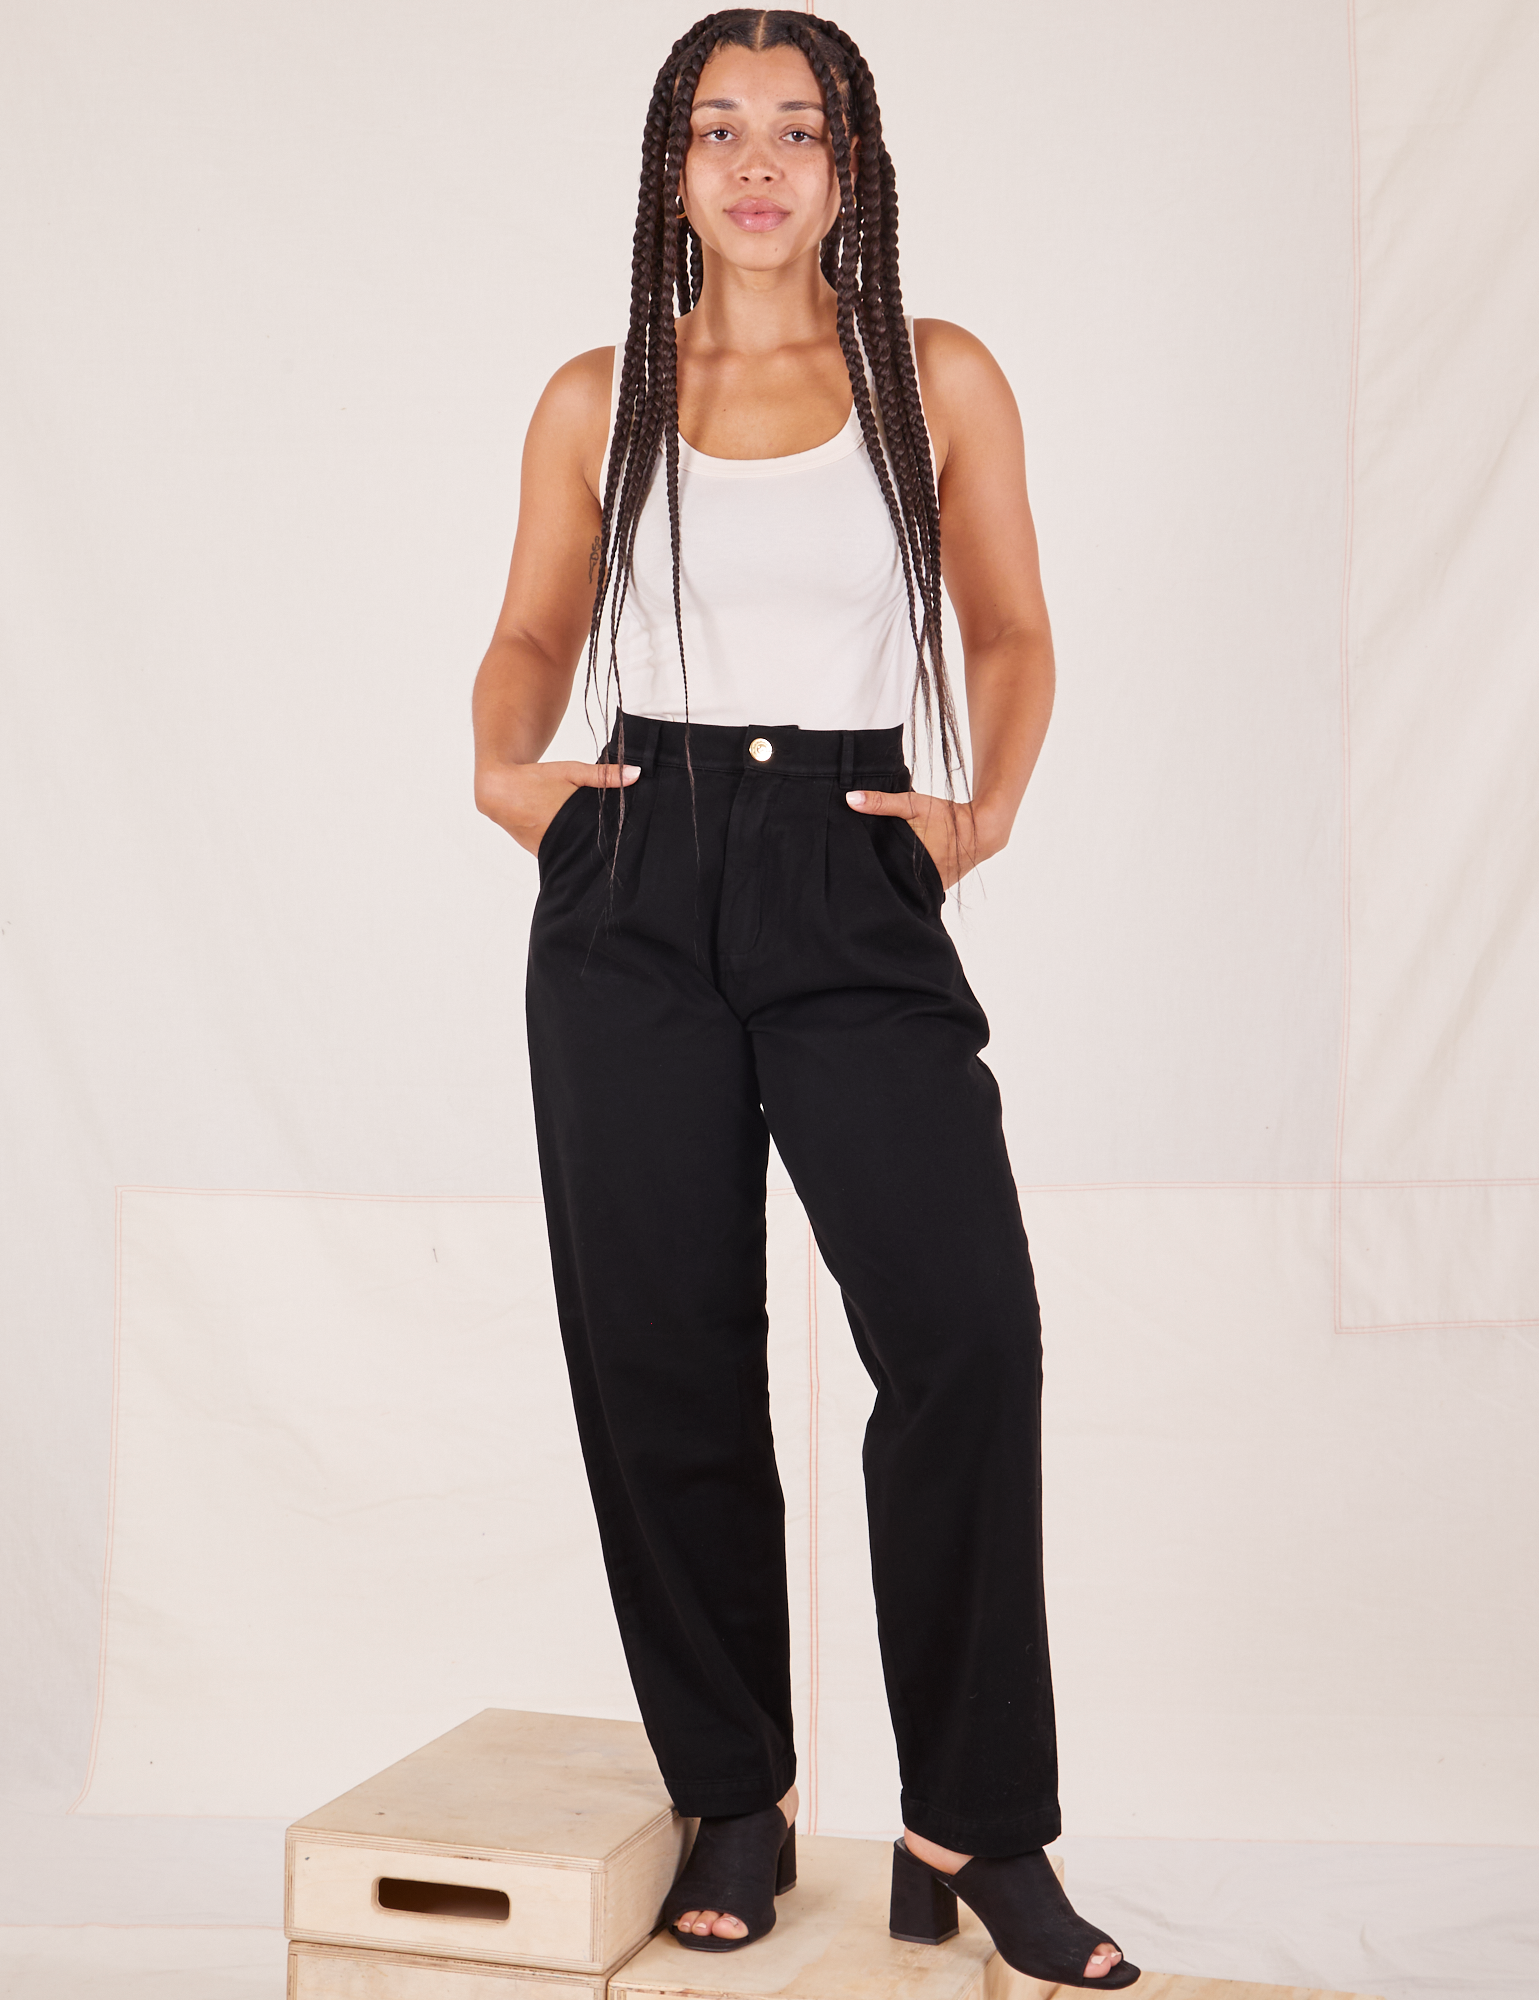 Gabi is 5&#39;7&quot; and wearing XXS Organic Trousers in Basic Black paired with vintage off-white Tank Top